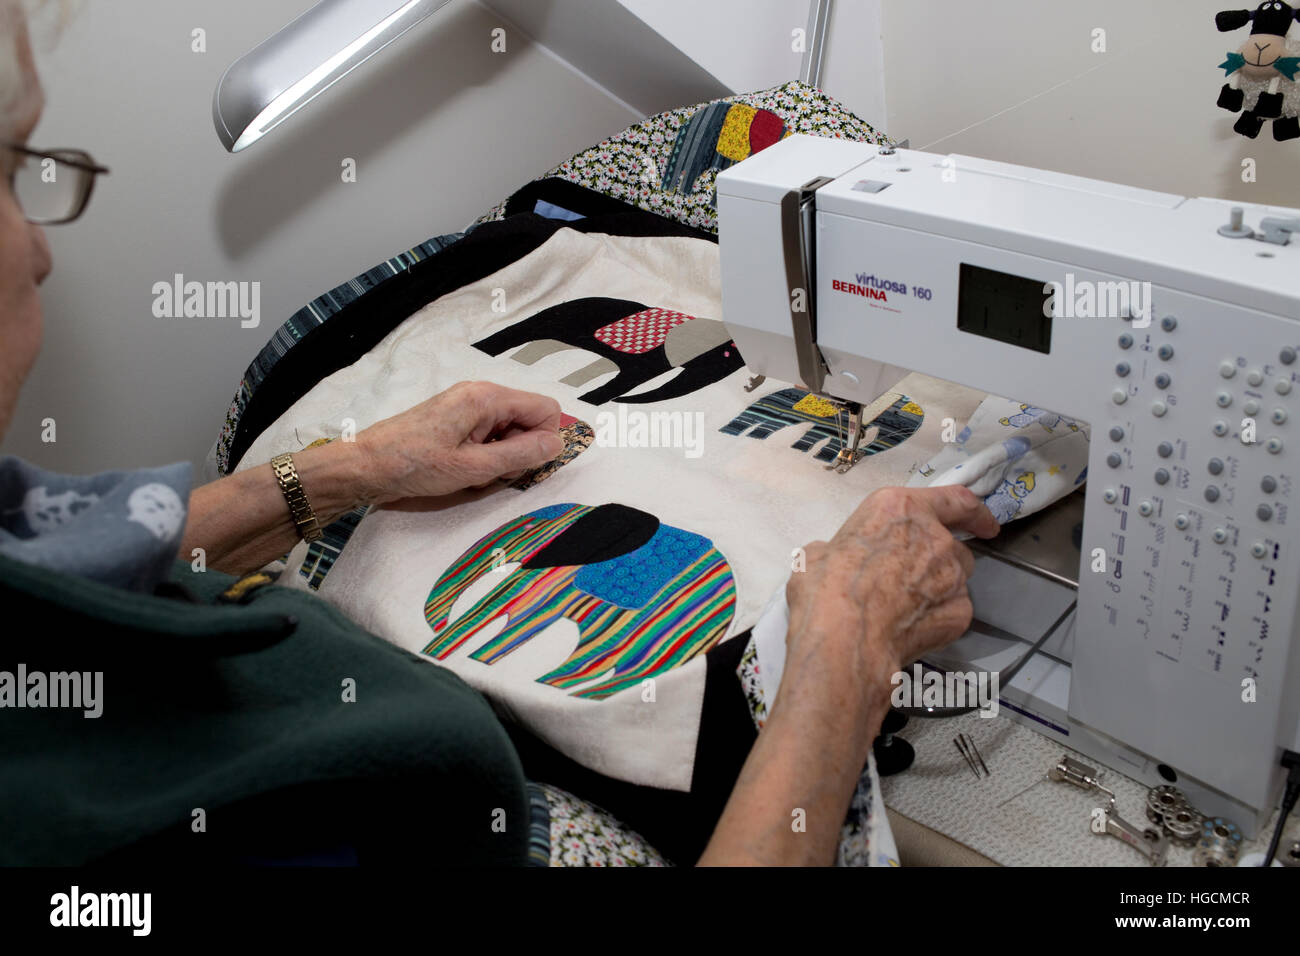 Hands of elderly woman using Bernina sewing machine for quilting bedspread with colour elephant motifs iUK Stock Photo